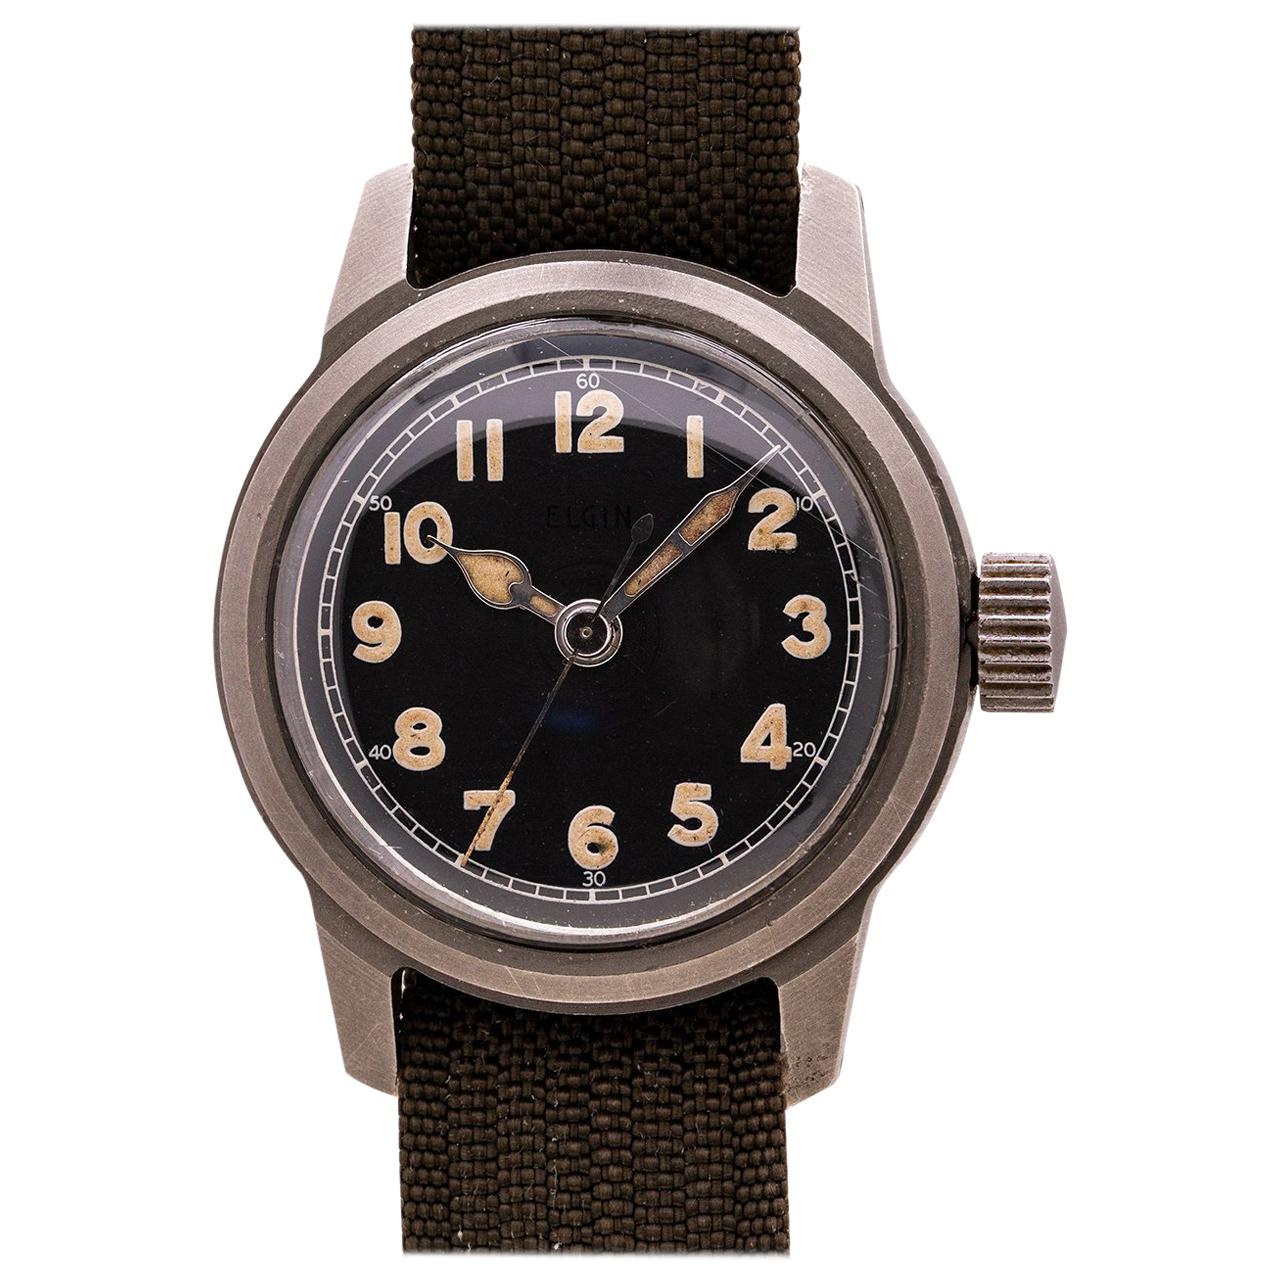 Elgin U.S. Government Issued WWII Era Watch